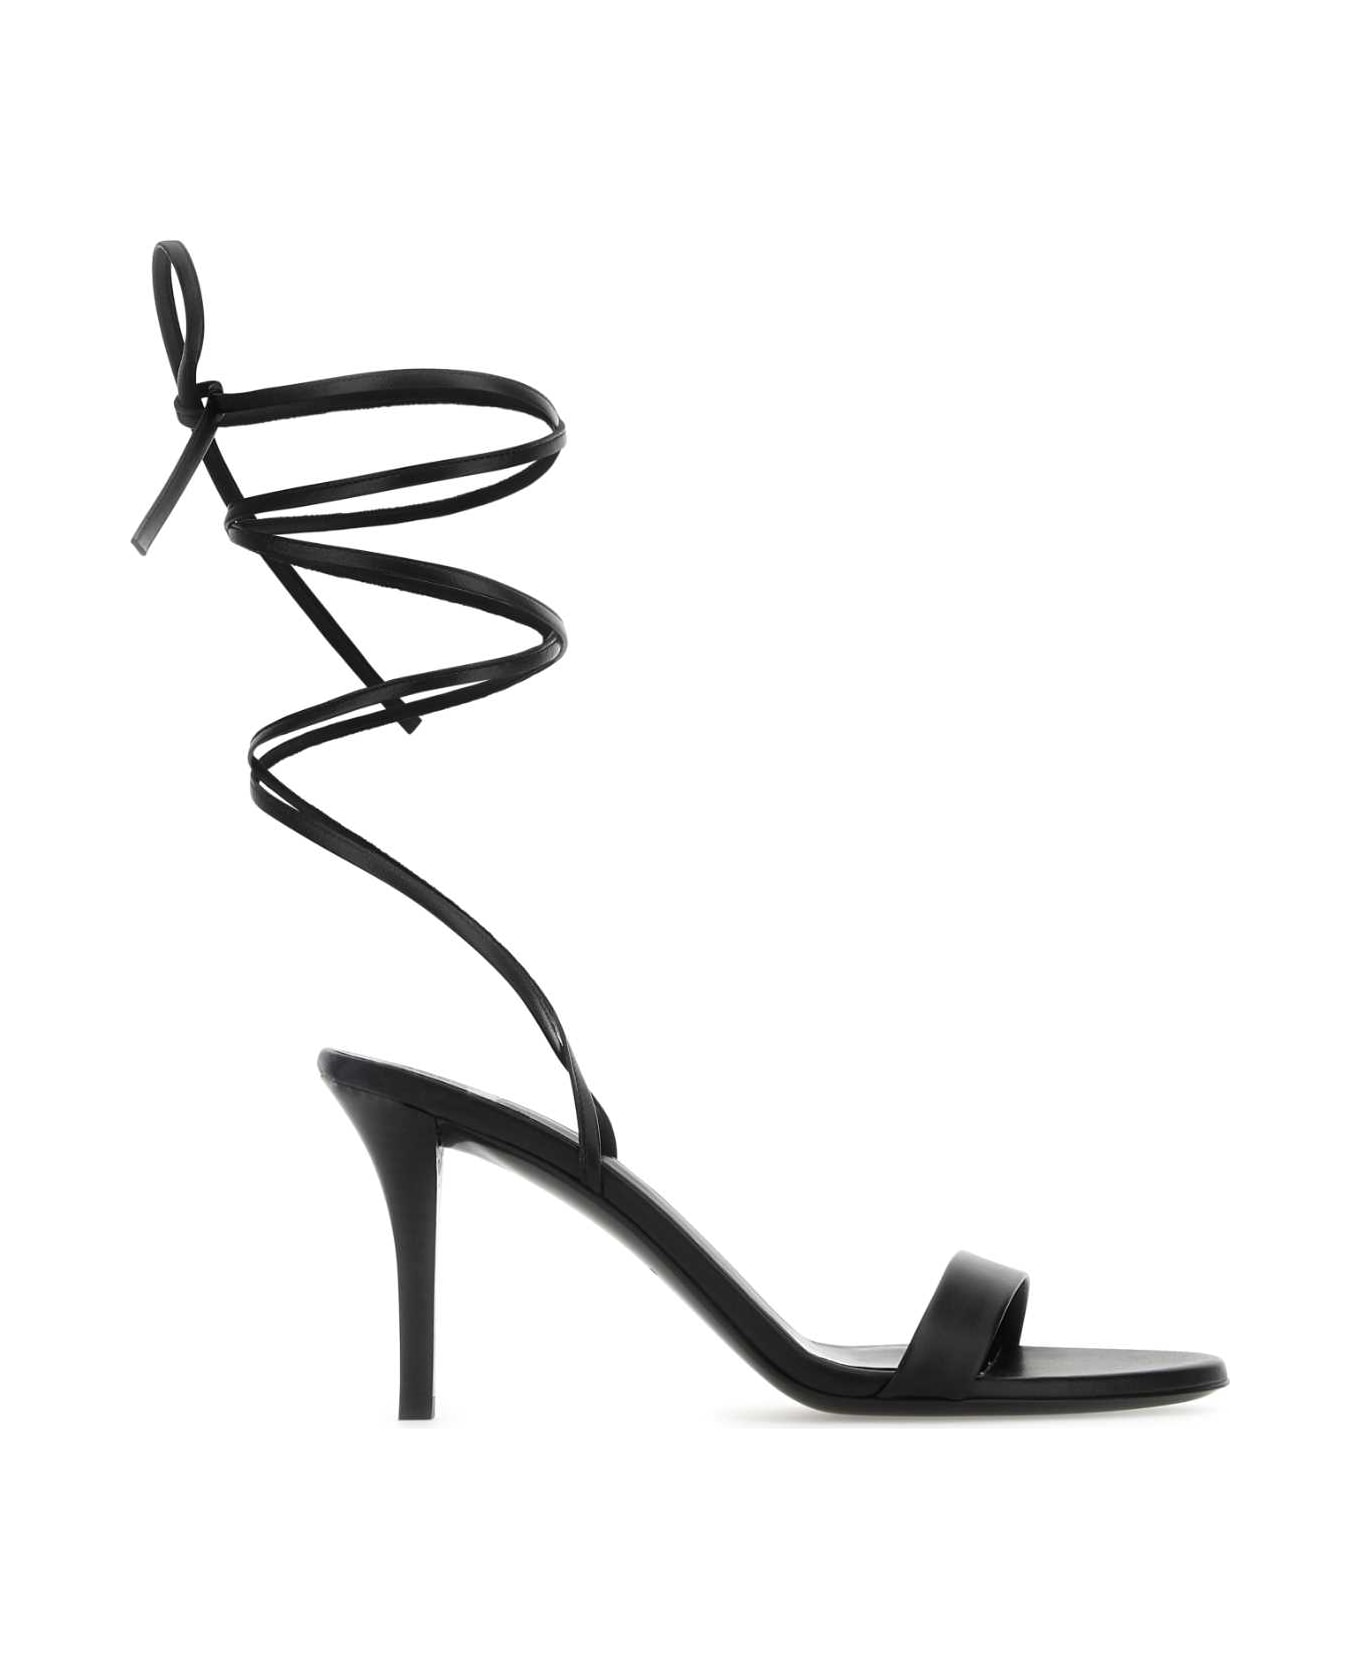 The Row Black Leather Maud Sandals - BLK